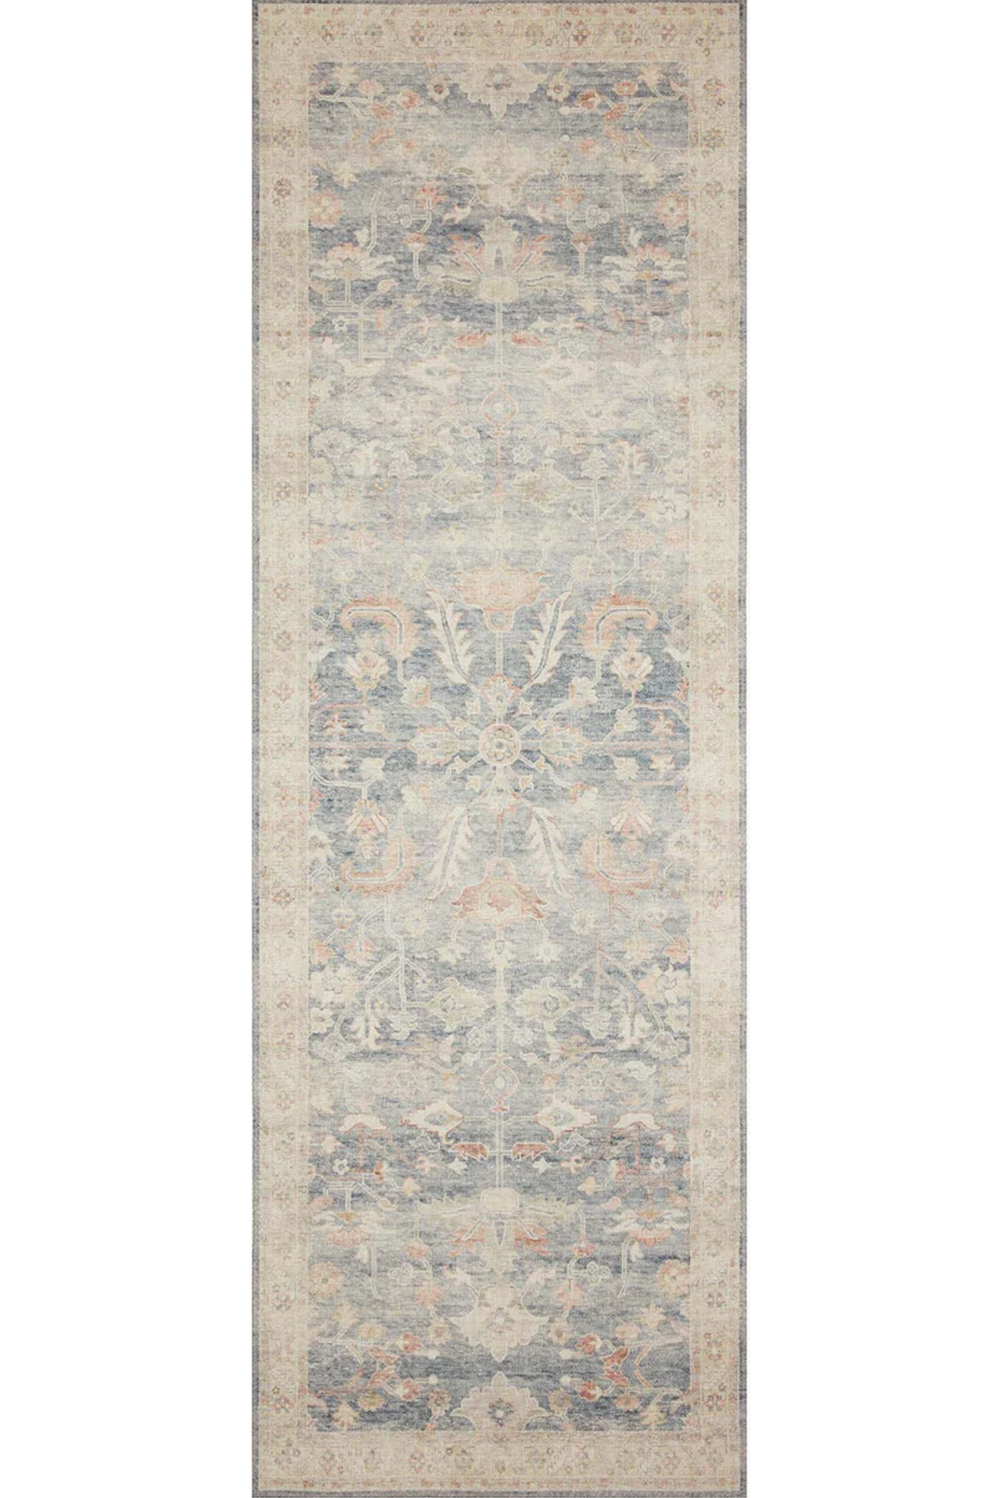 The Best Loloi Rugs - Nick + Alicia